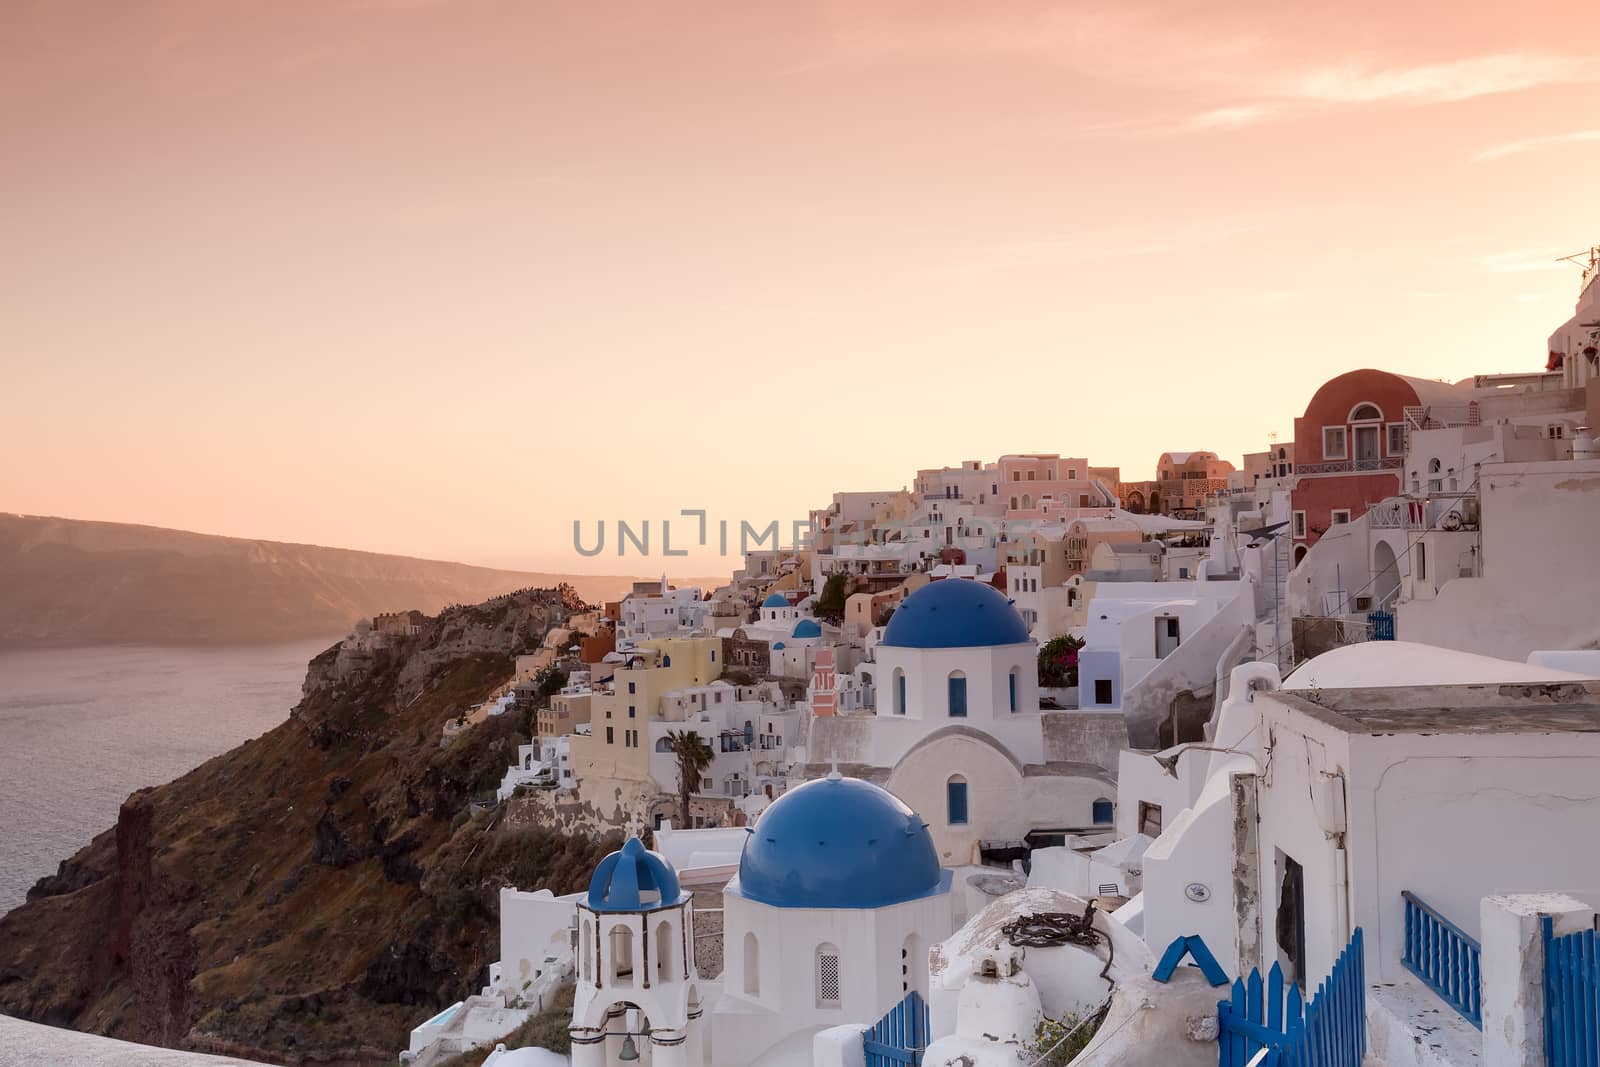 The sunset at Oia village in Santorini island in Greece by ververidis